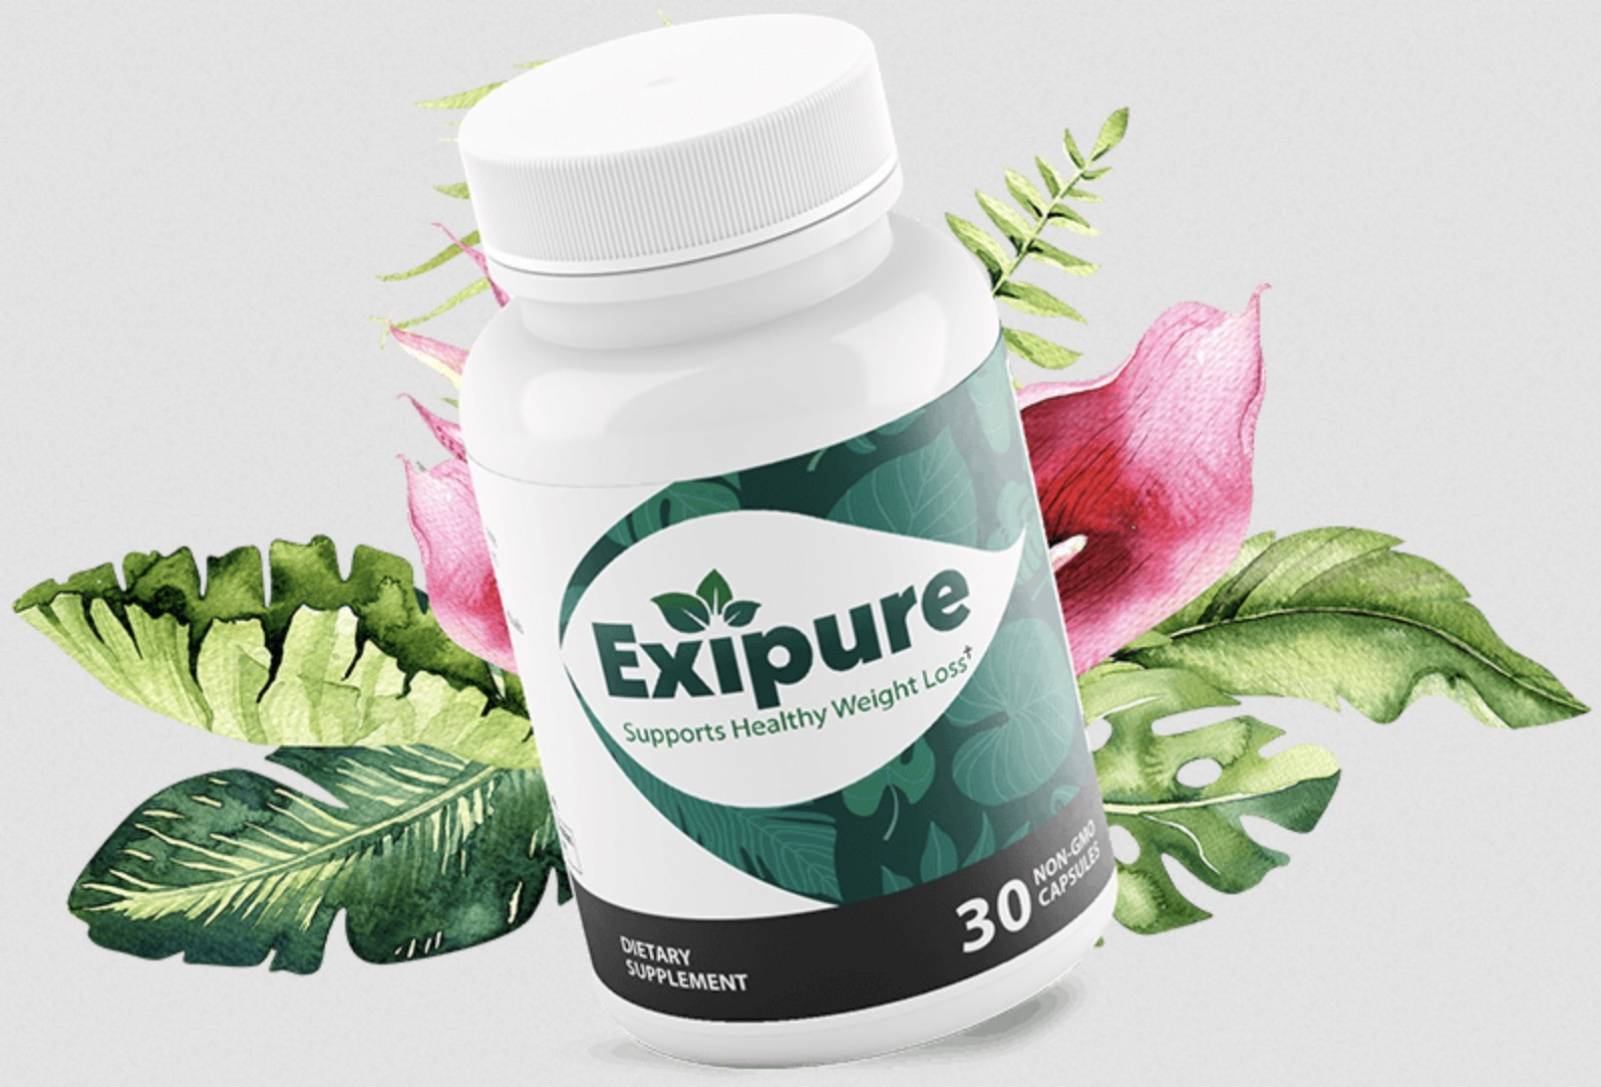 Get Exipure Weight Loss